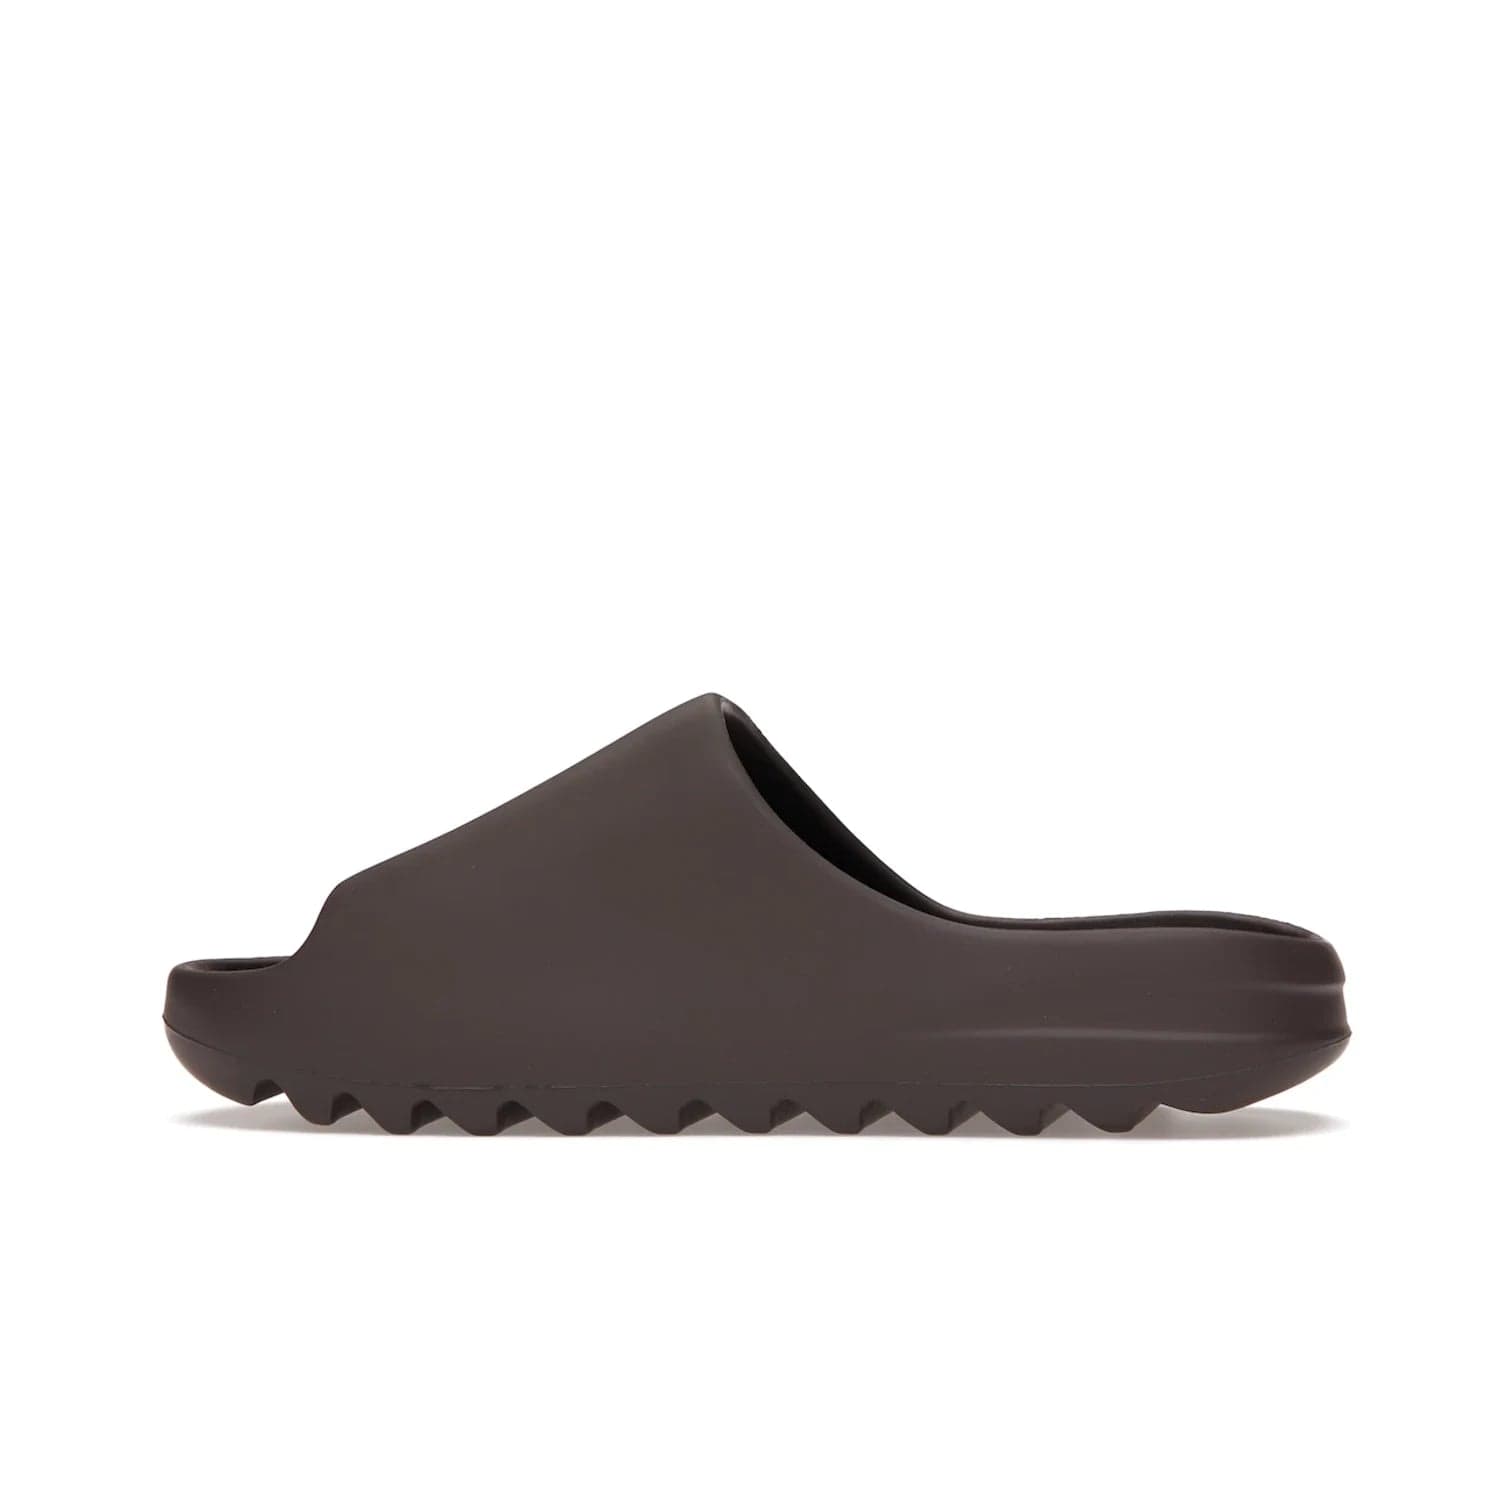 adidas Yeezy Slide Soot - Image 20 - Only at www.BallersClubKickz.com - Shop the Yeezy Slide Soot sneaker by Adidas, a sleek blend of form and function. Monochrome silhouette in Soot/Soot/Soot. Lightweight EVA foam offers comfort and durability. Get the must-have style today.